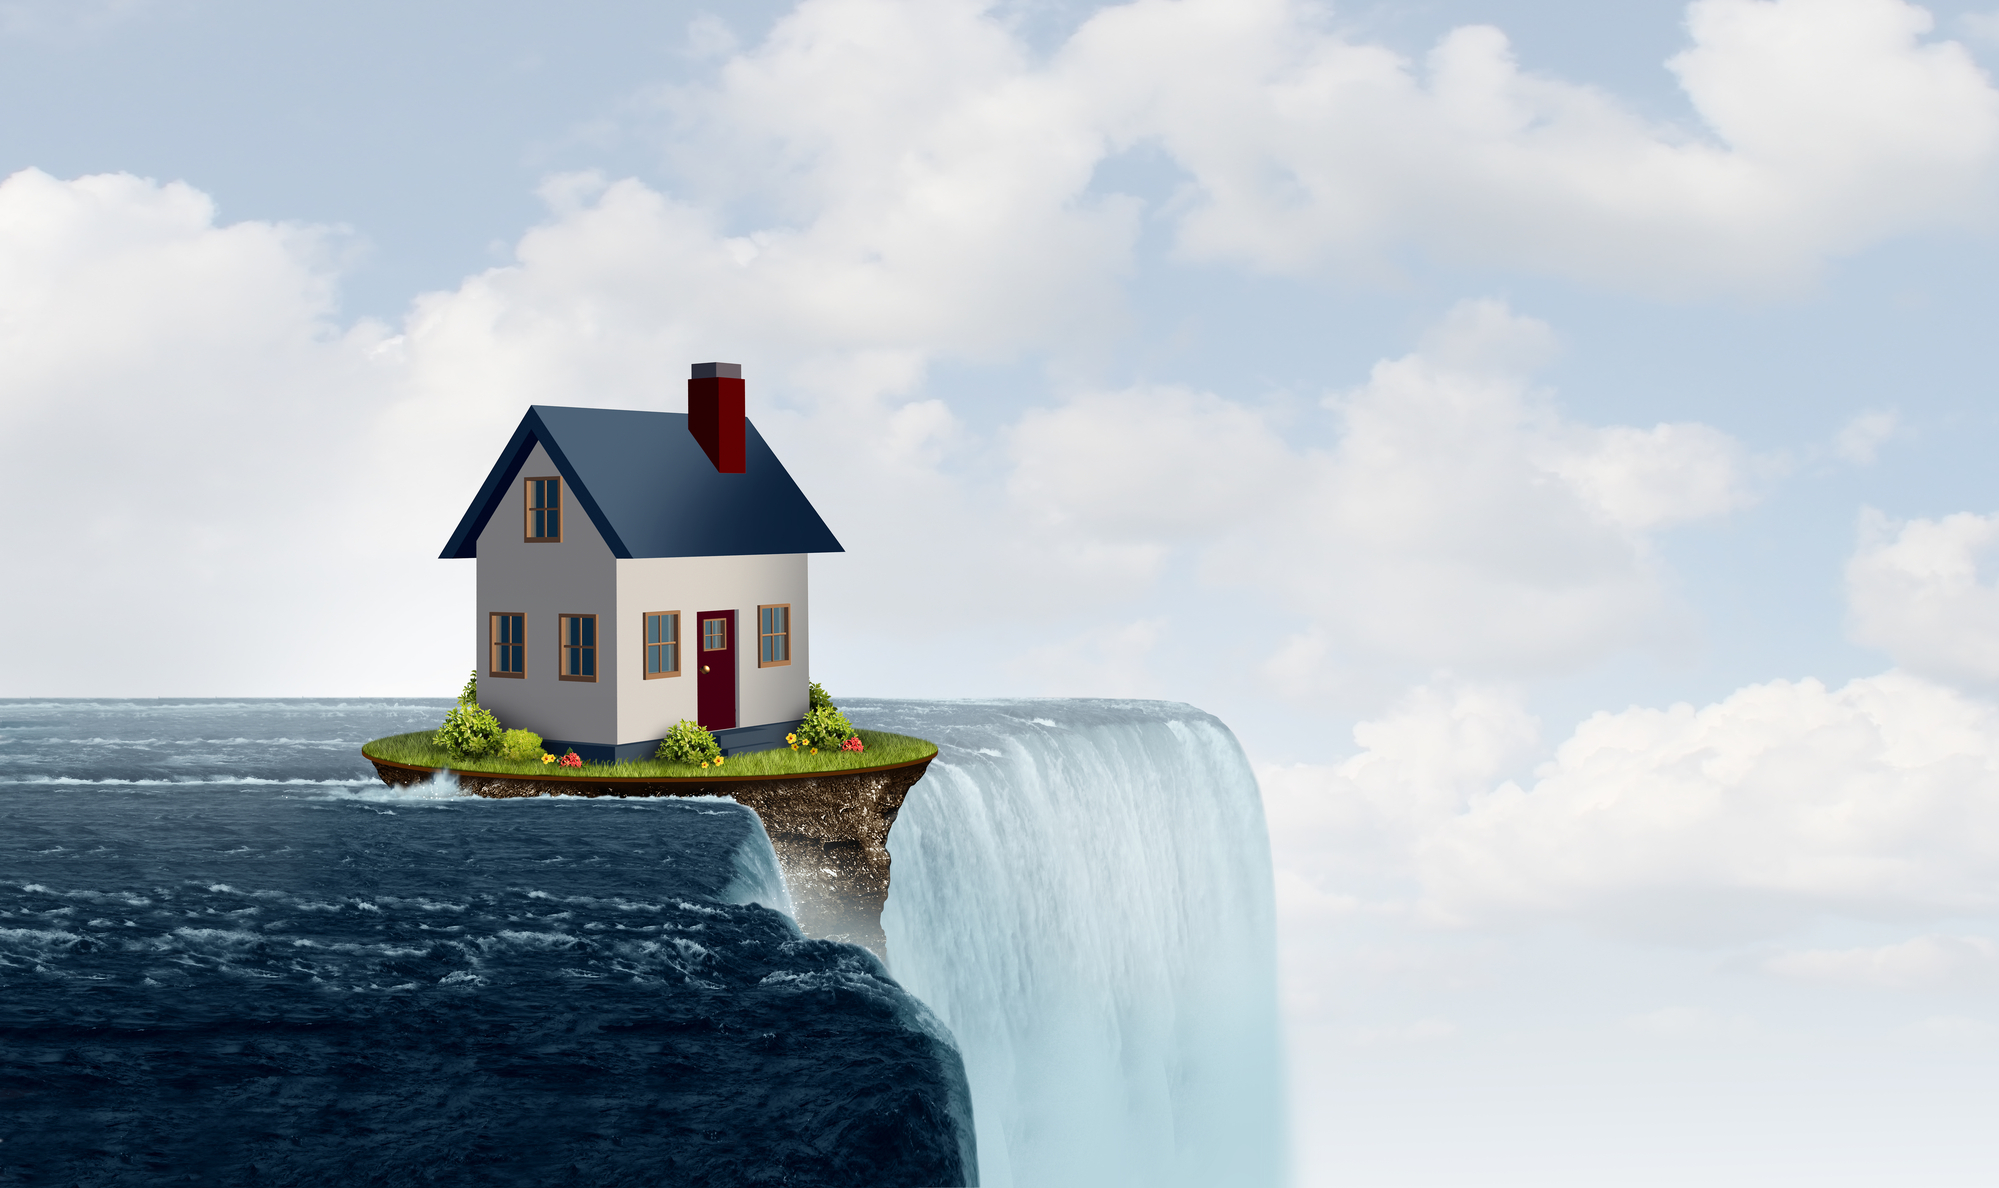 Farmers Insurance - Home on a cliff by waterfall